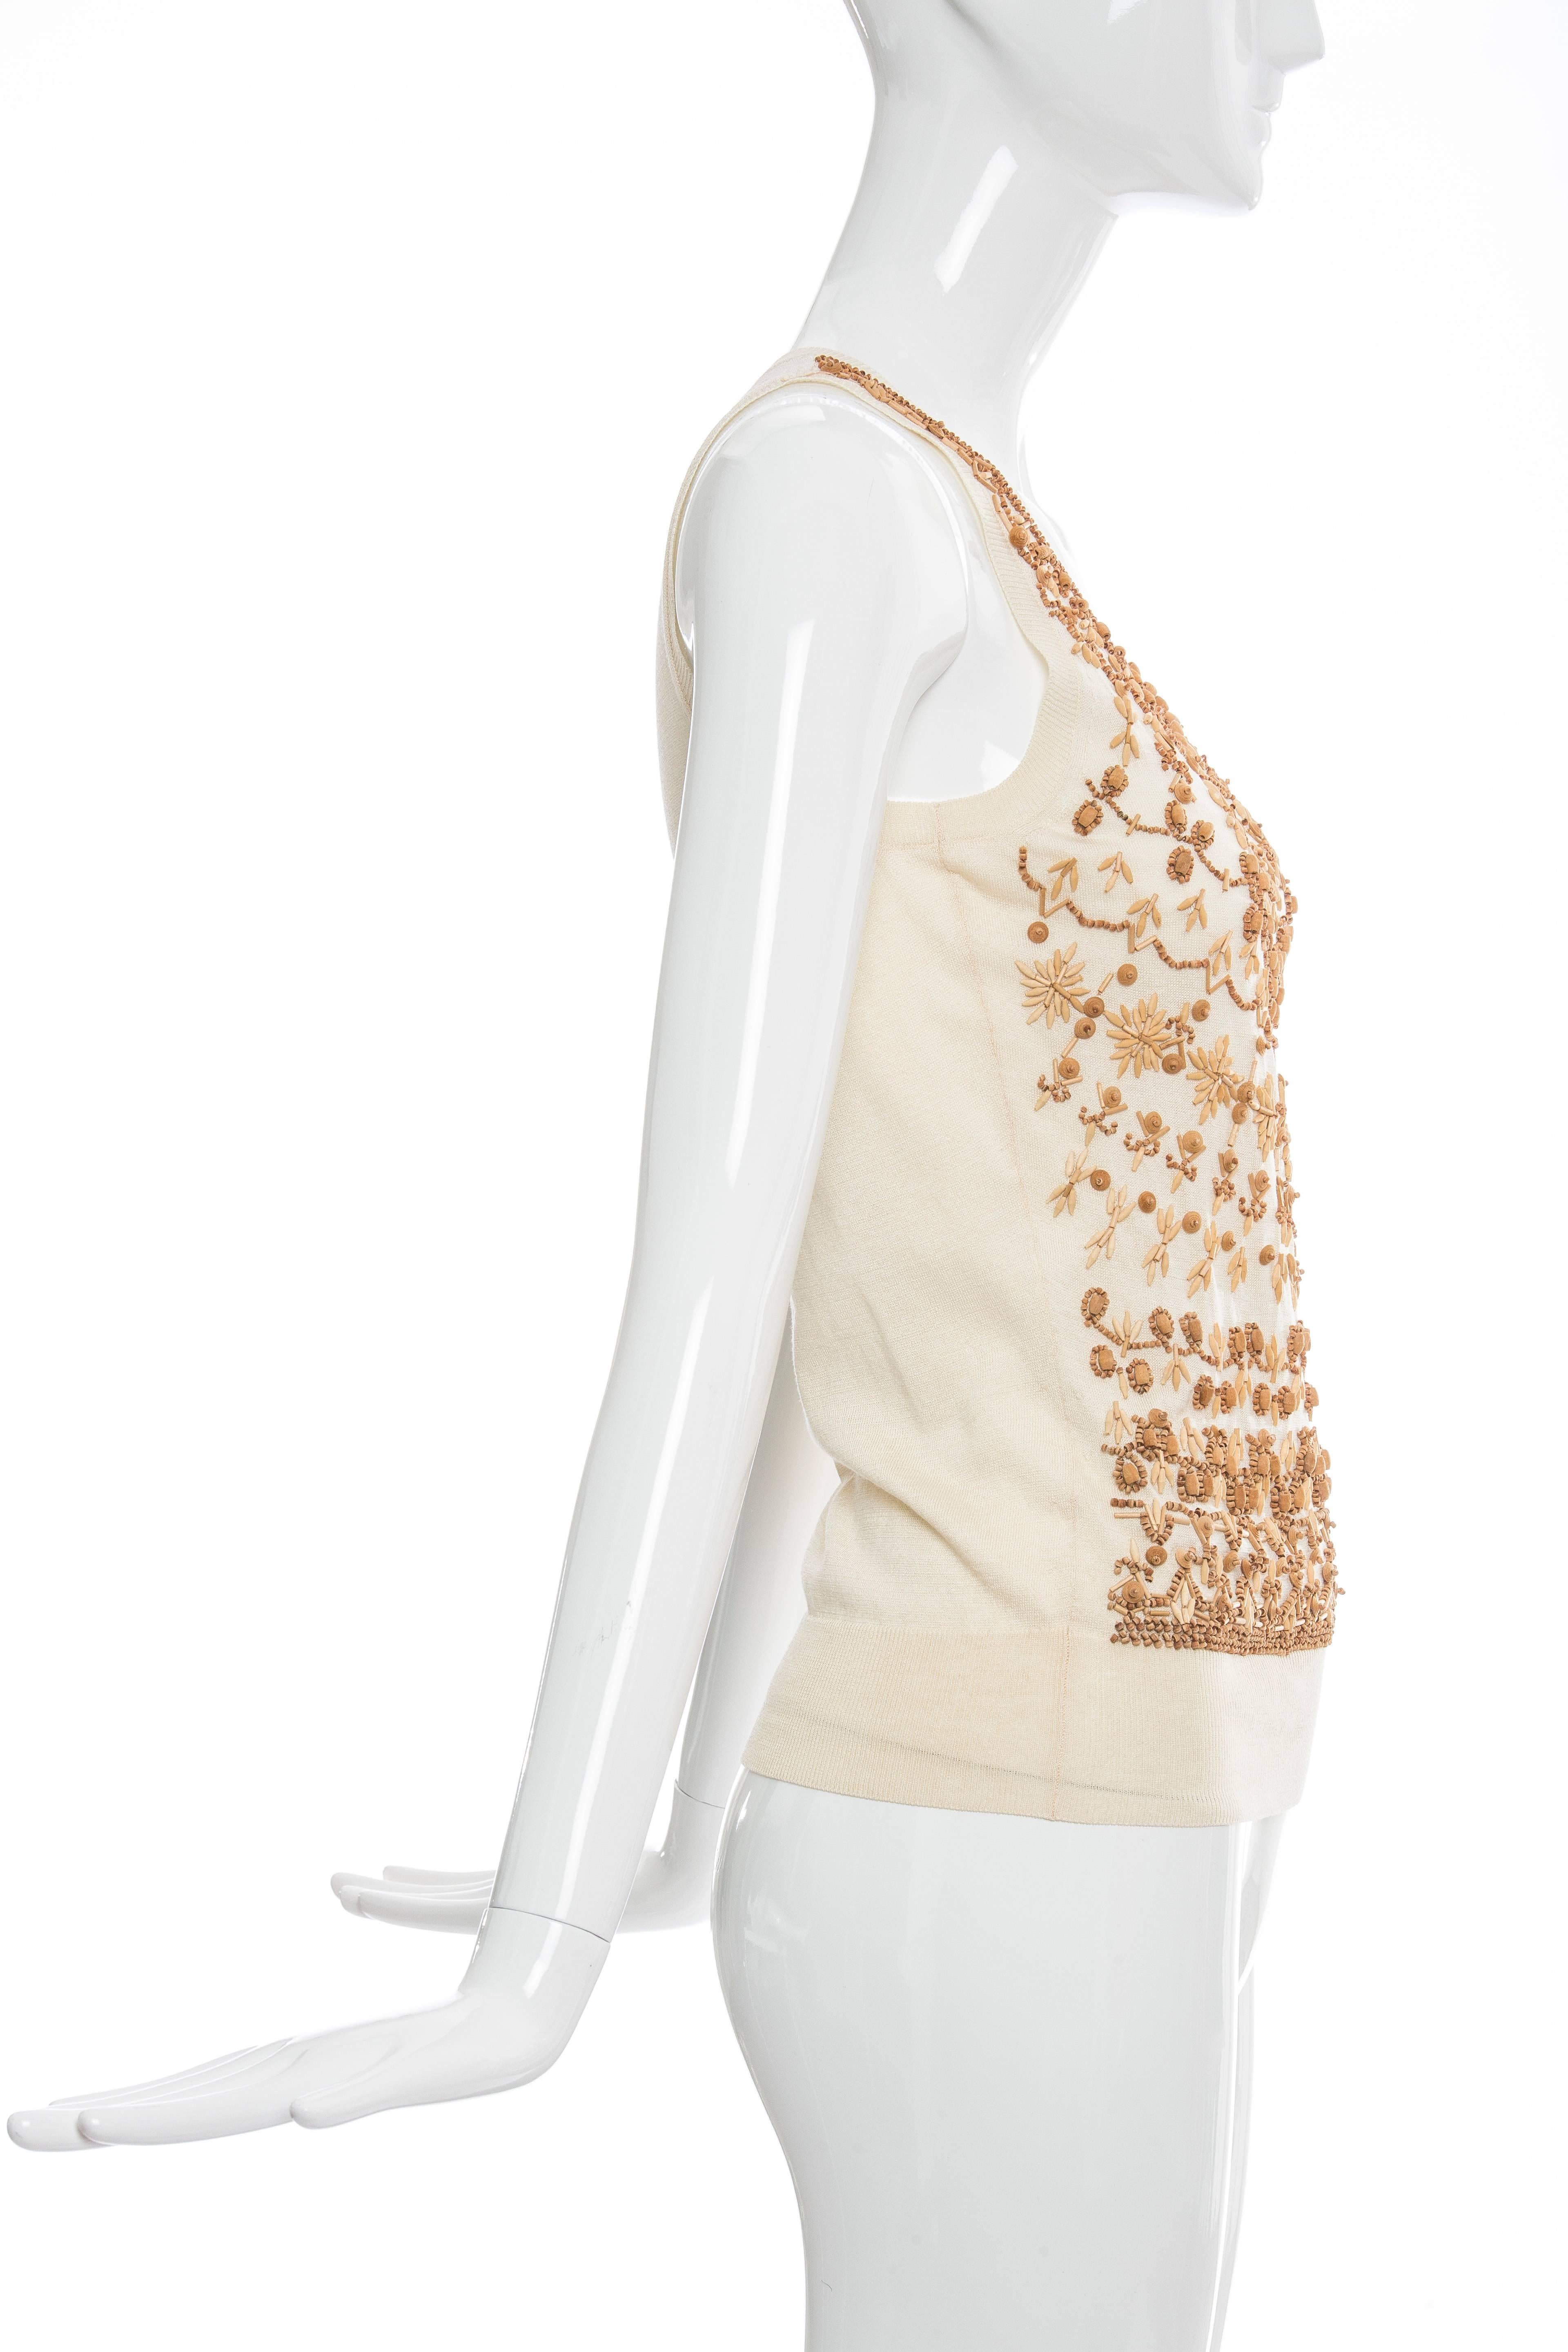 Alexander McQueen Cream Cotton Silk Tank Embroidered Wood Beading, Spring 2006 In New Condition For Sale In Cincinnati, OH